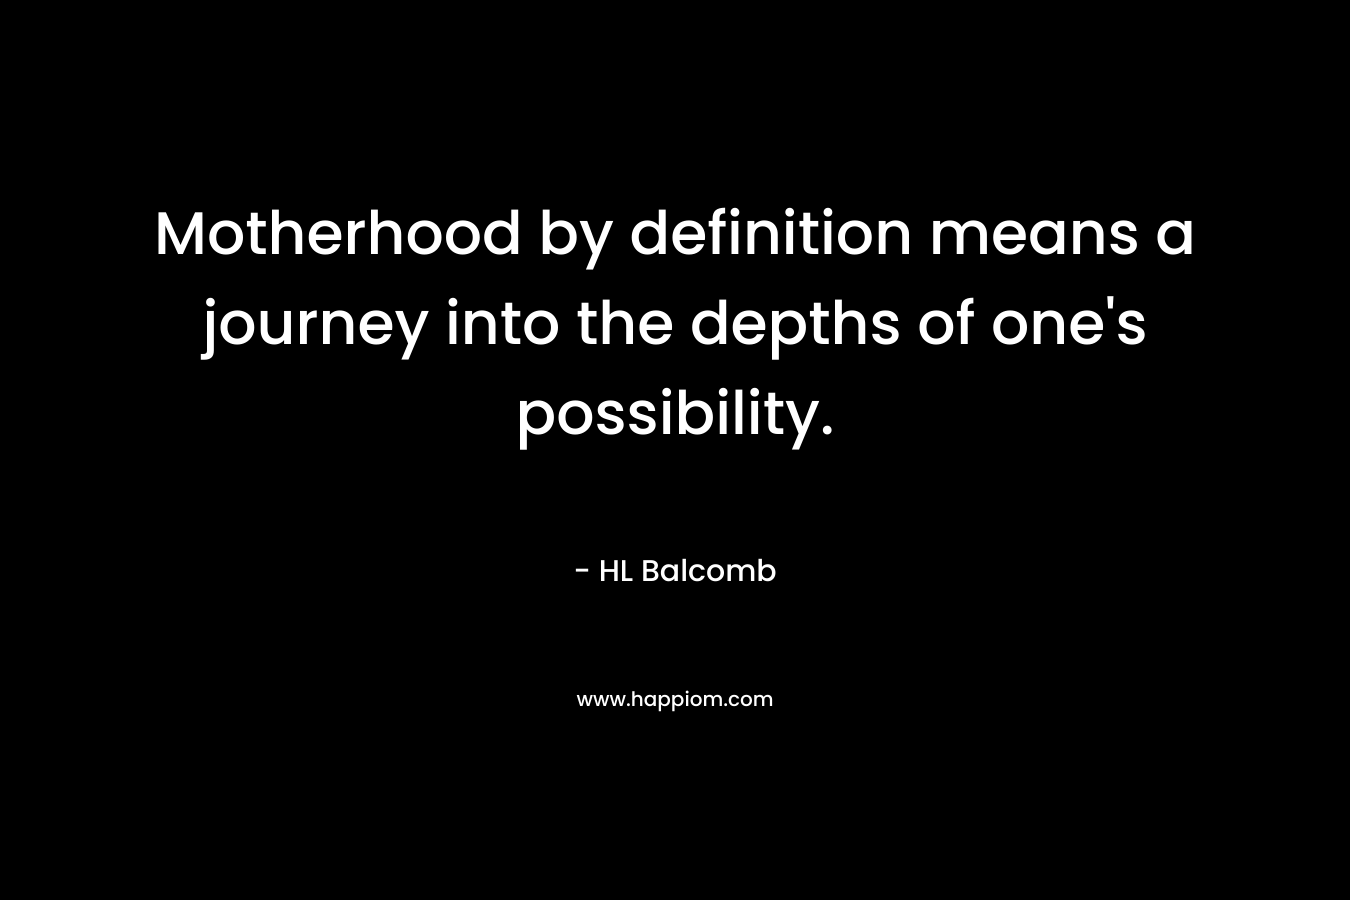 Motherhood by definition means a journey into the depths of one’s possibility. – HL Balcomb